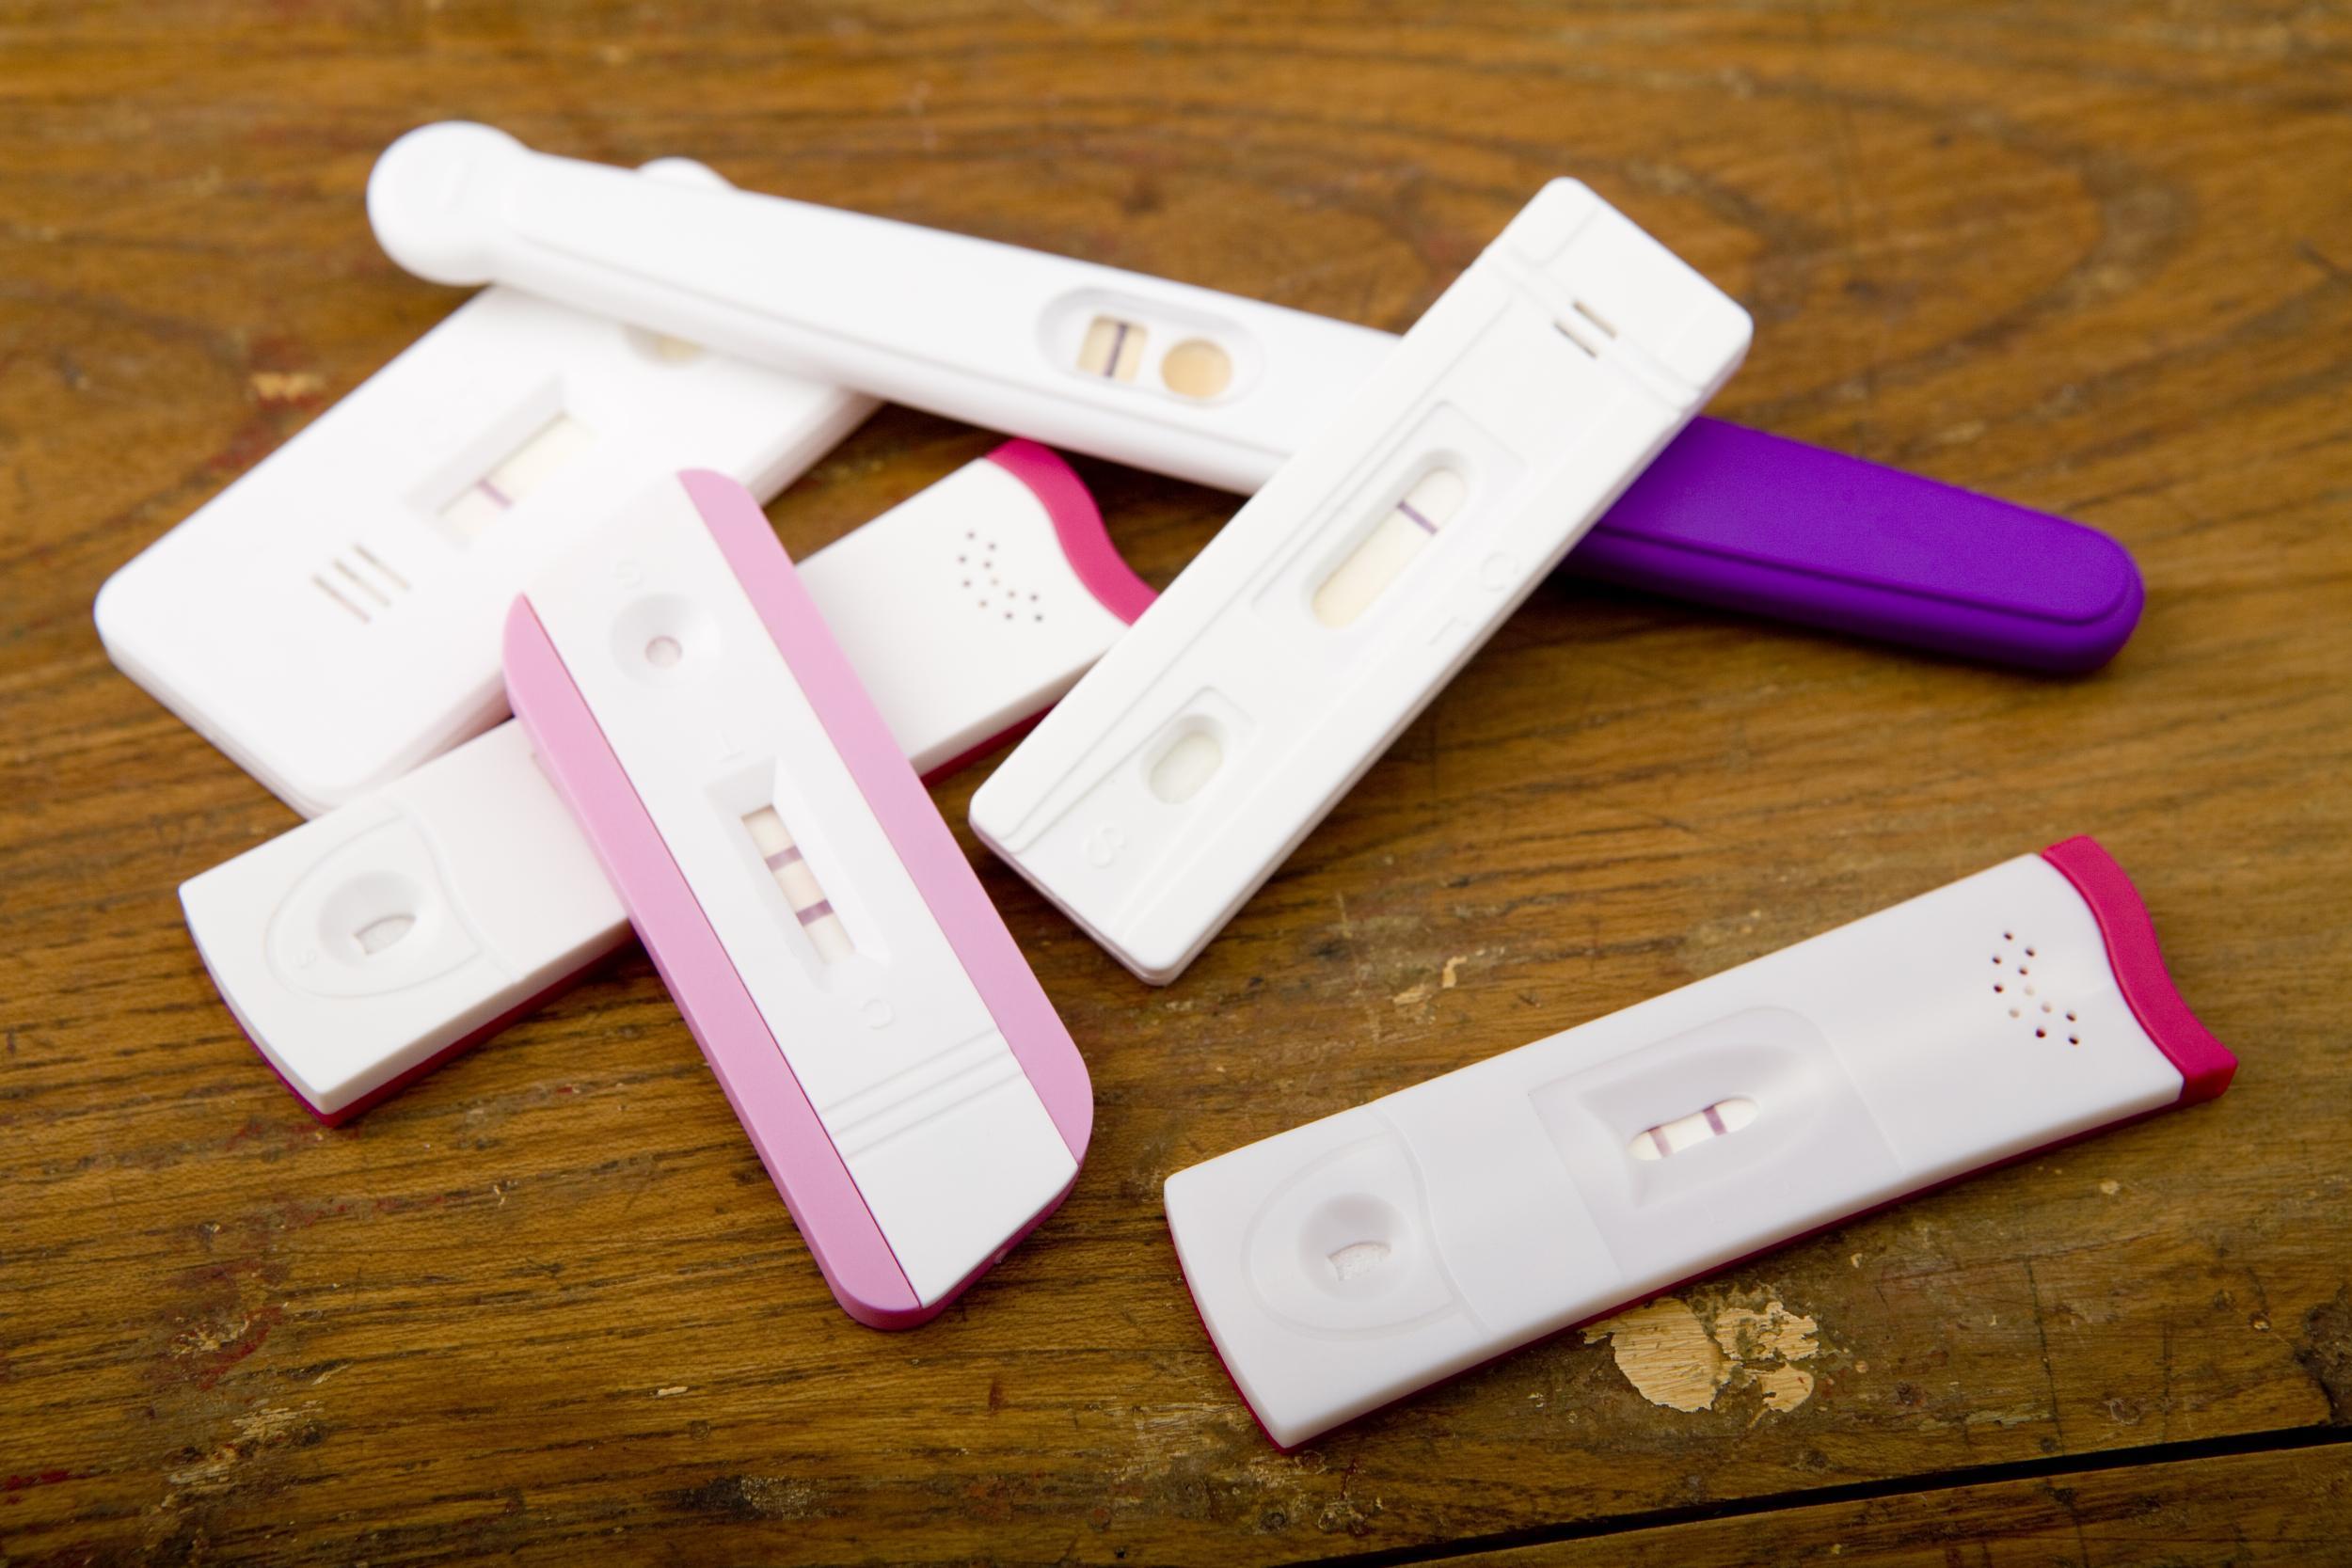 Some expectant mums are taking multiple pregnancy tests a day